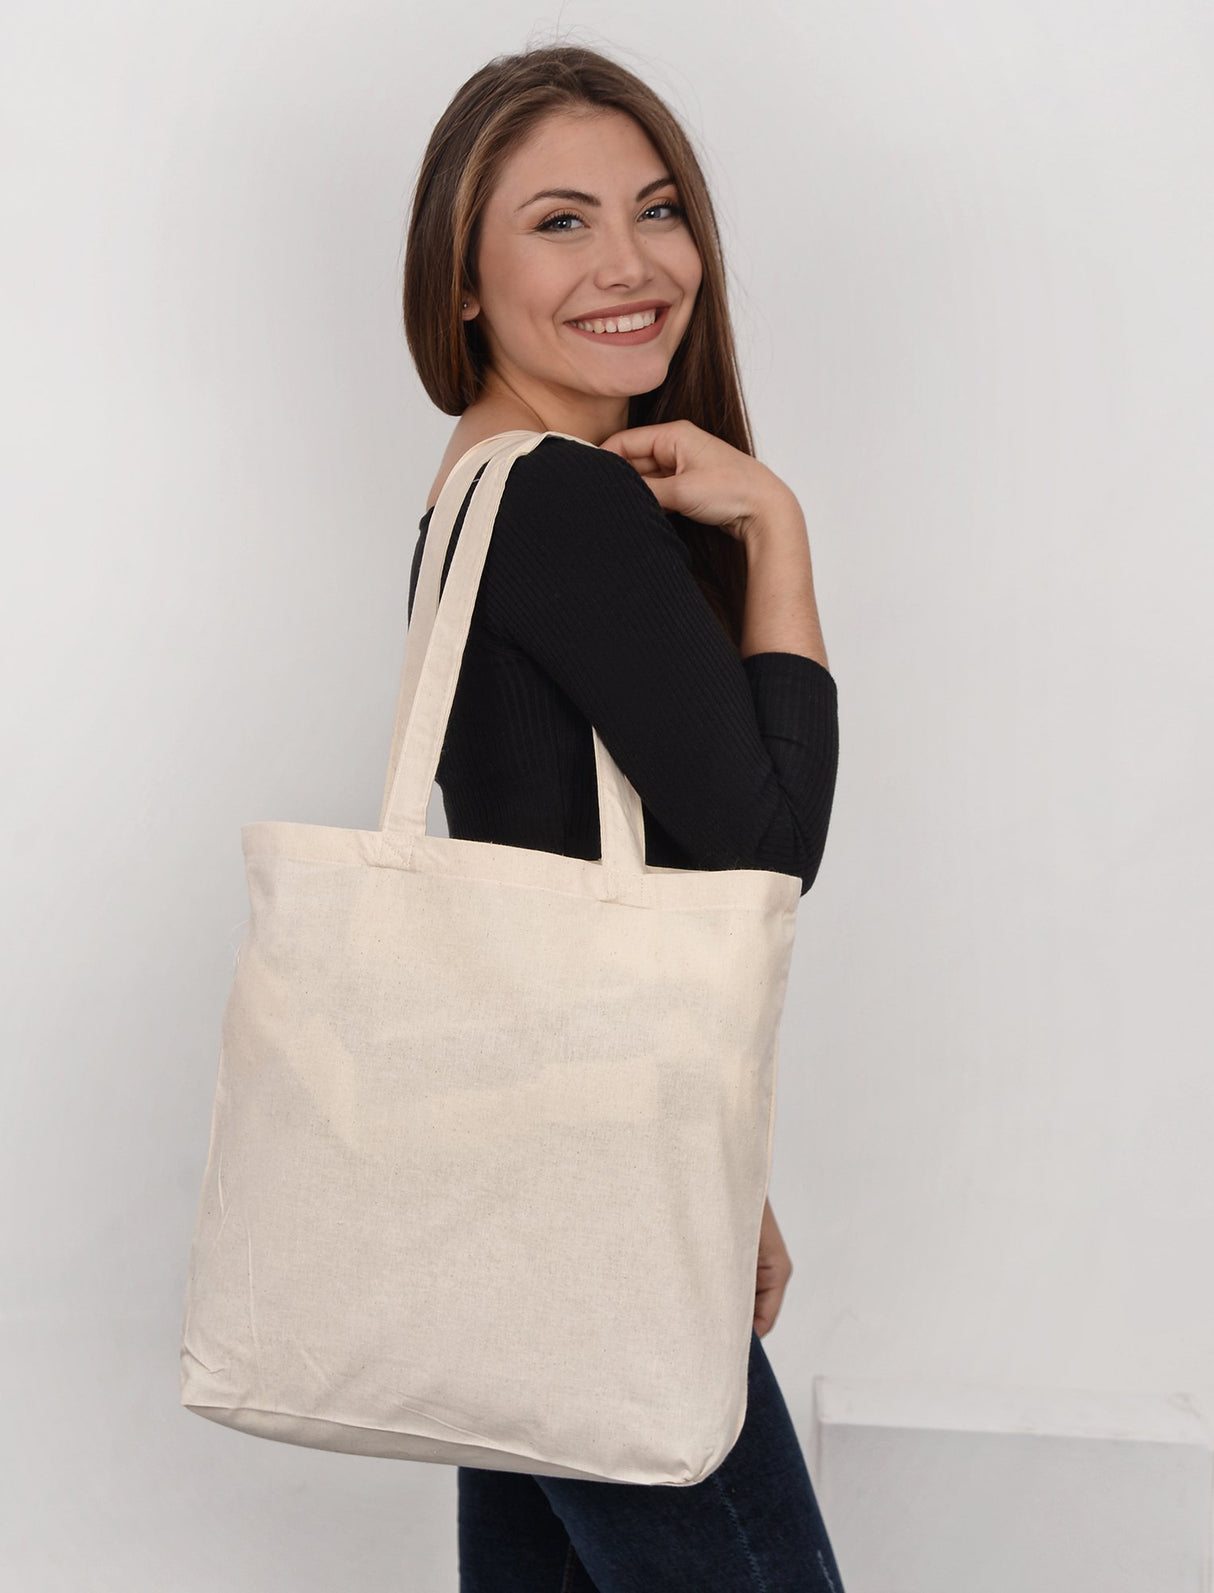 12 ct Over-the-Shoulder Grocery Tote Bags 100% Cotton - By Dozen